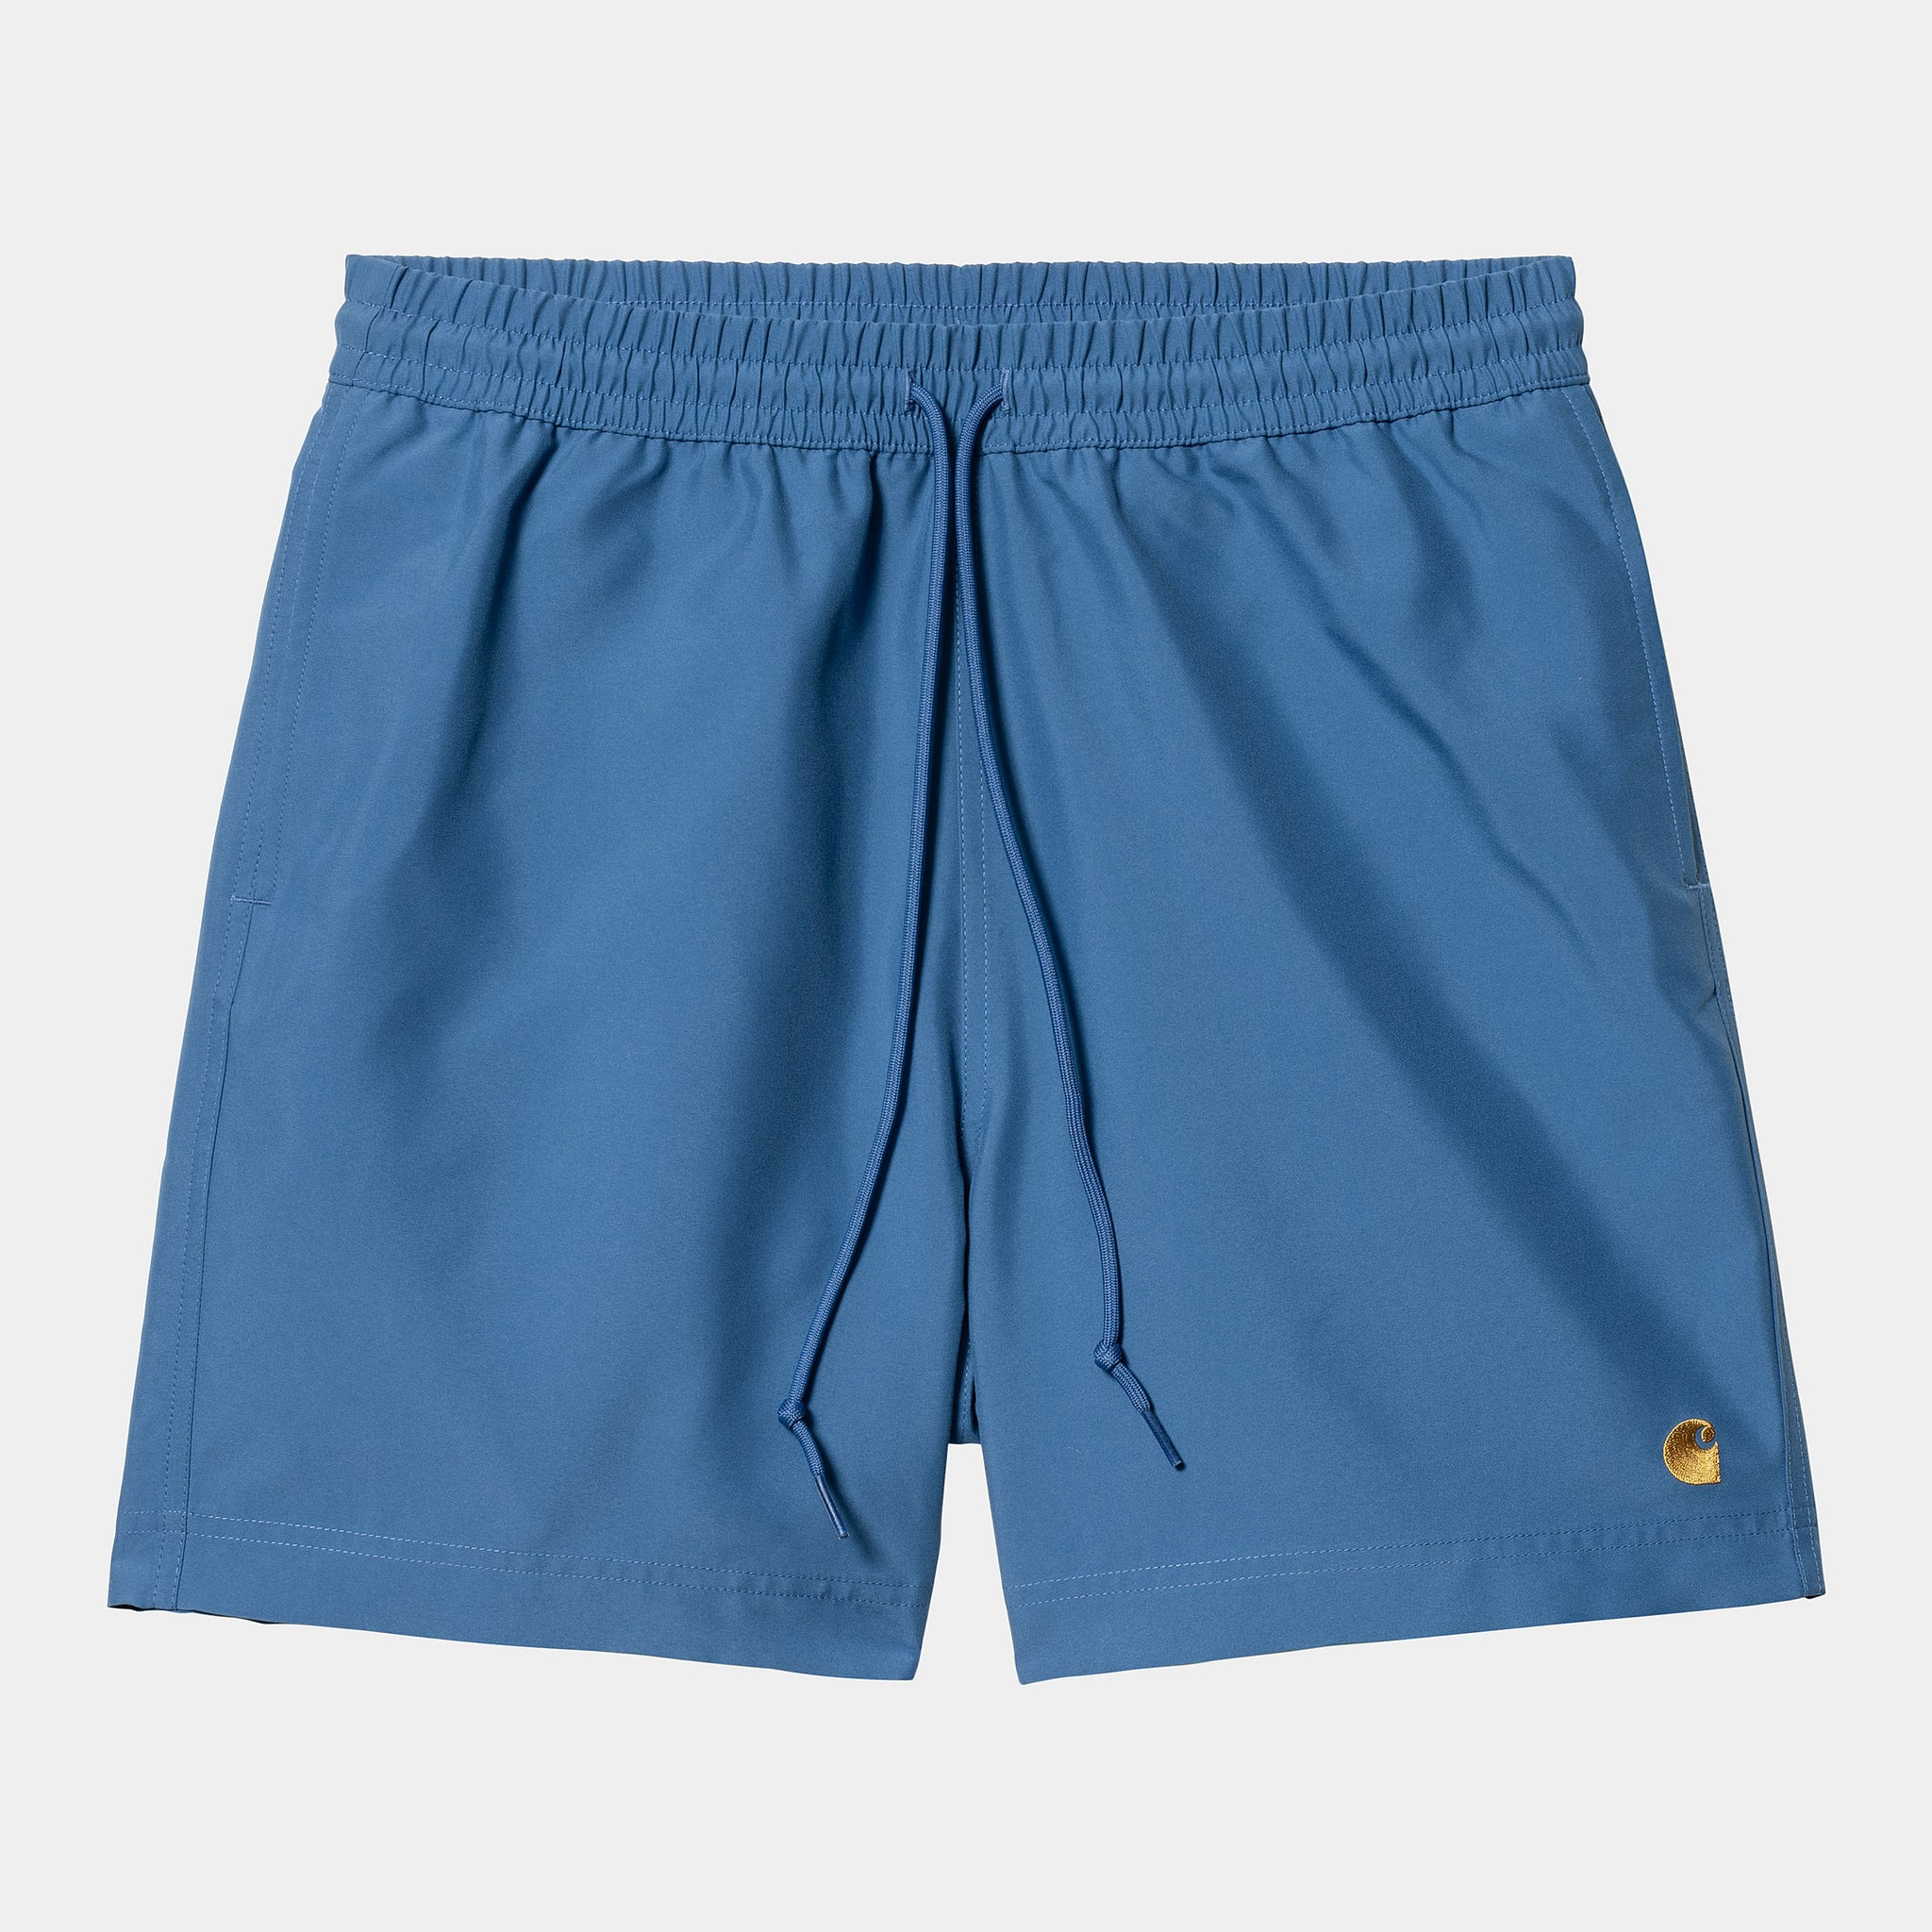 Chase Swmim Trunks (Acapulco/Gold)